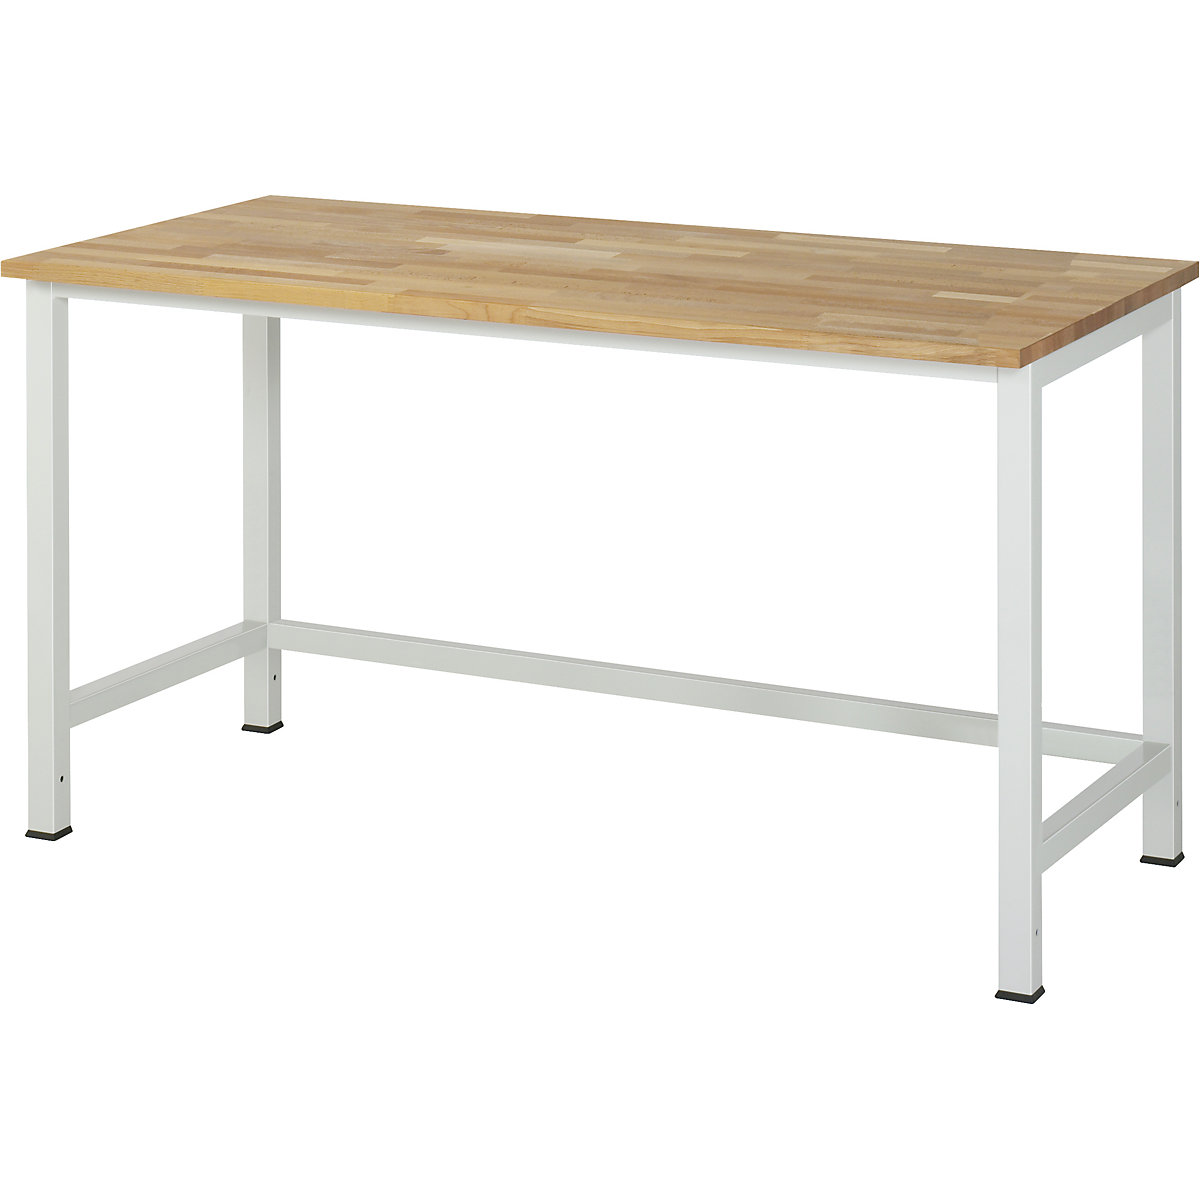 Work table for Series 900 workplace system – RAU, solid beech, width 1500 mm-3